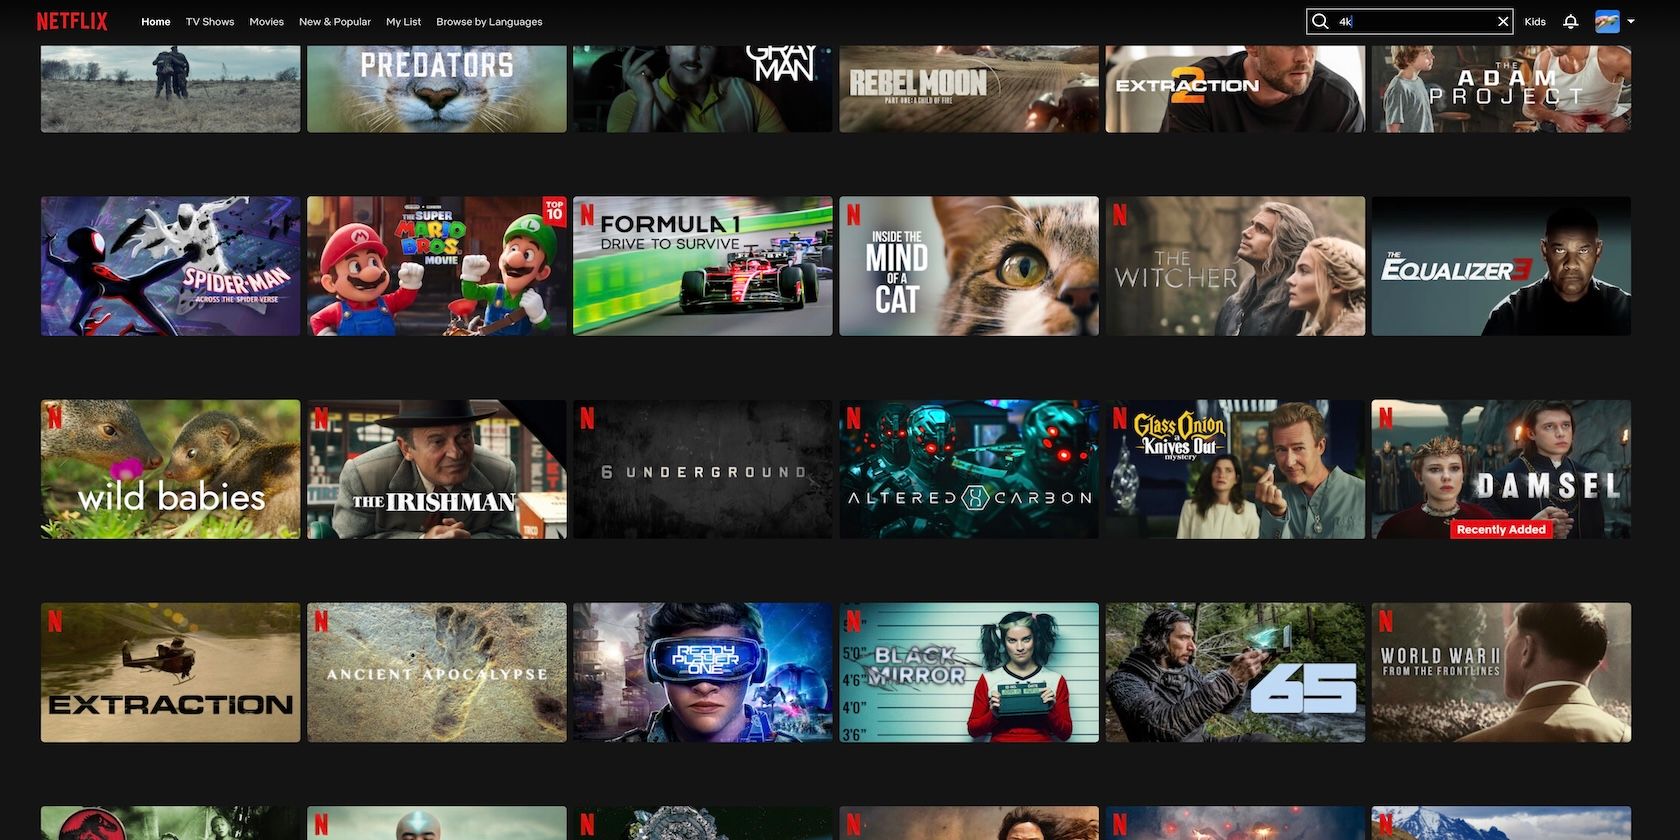 Netflix 4K Offerings with search bar